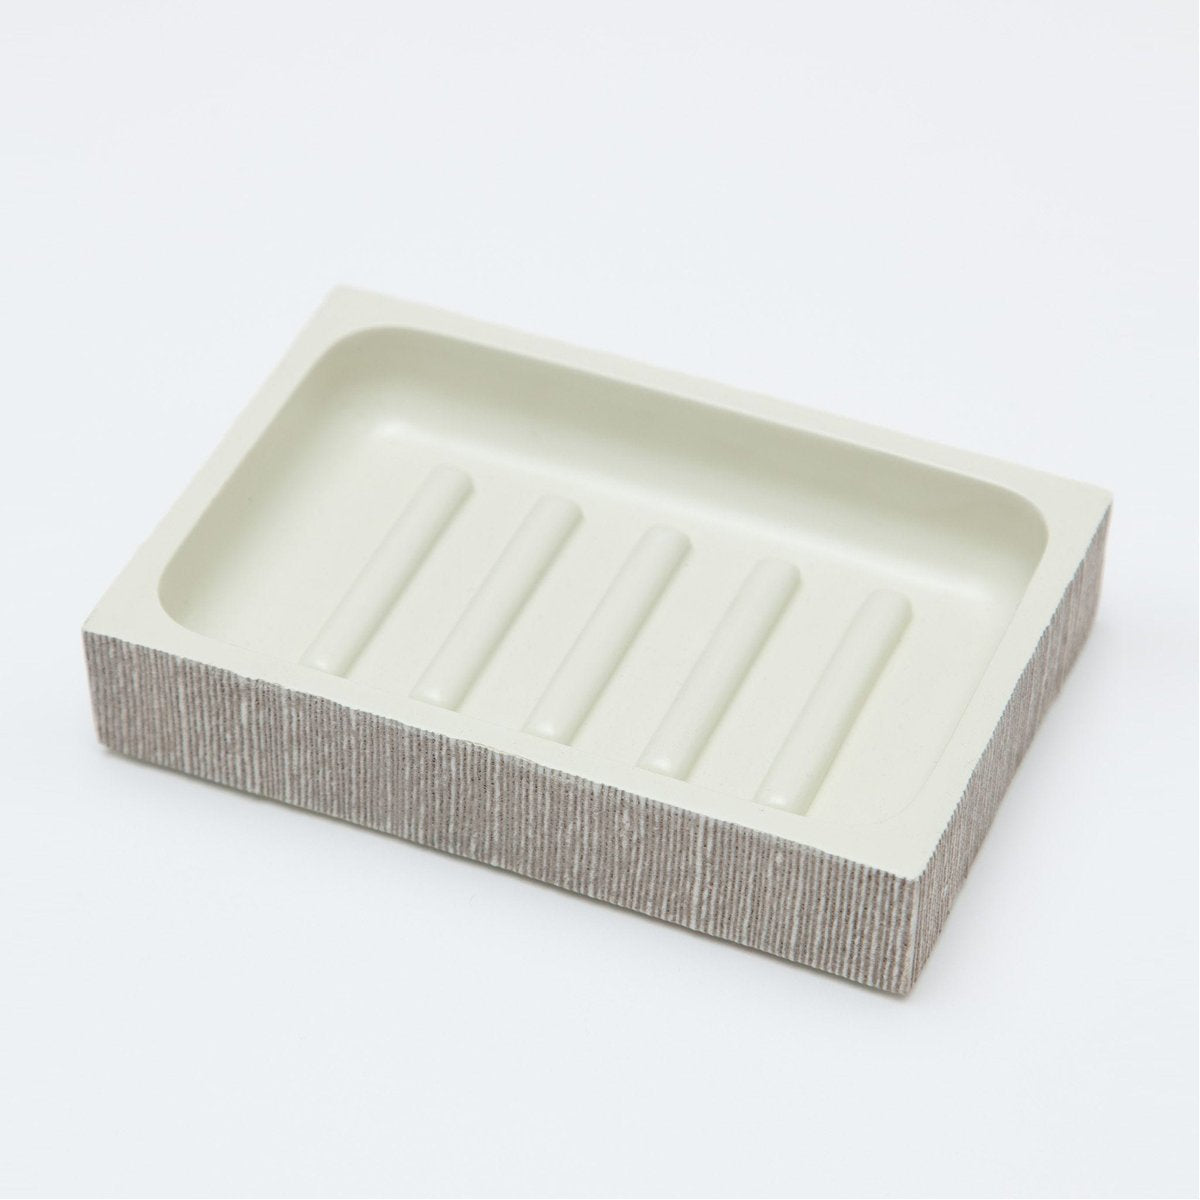 Pigeon and Poodle Bruges Rectangular Soap Dish, Straight